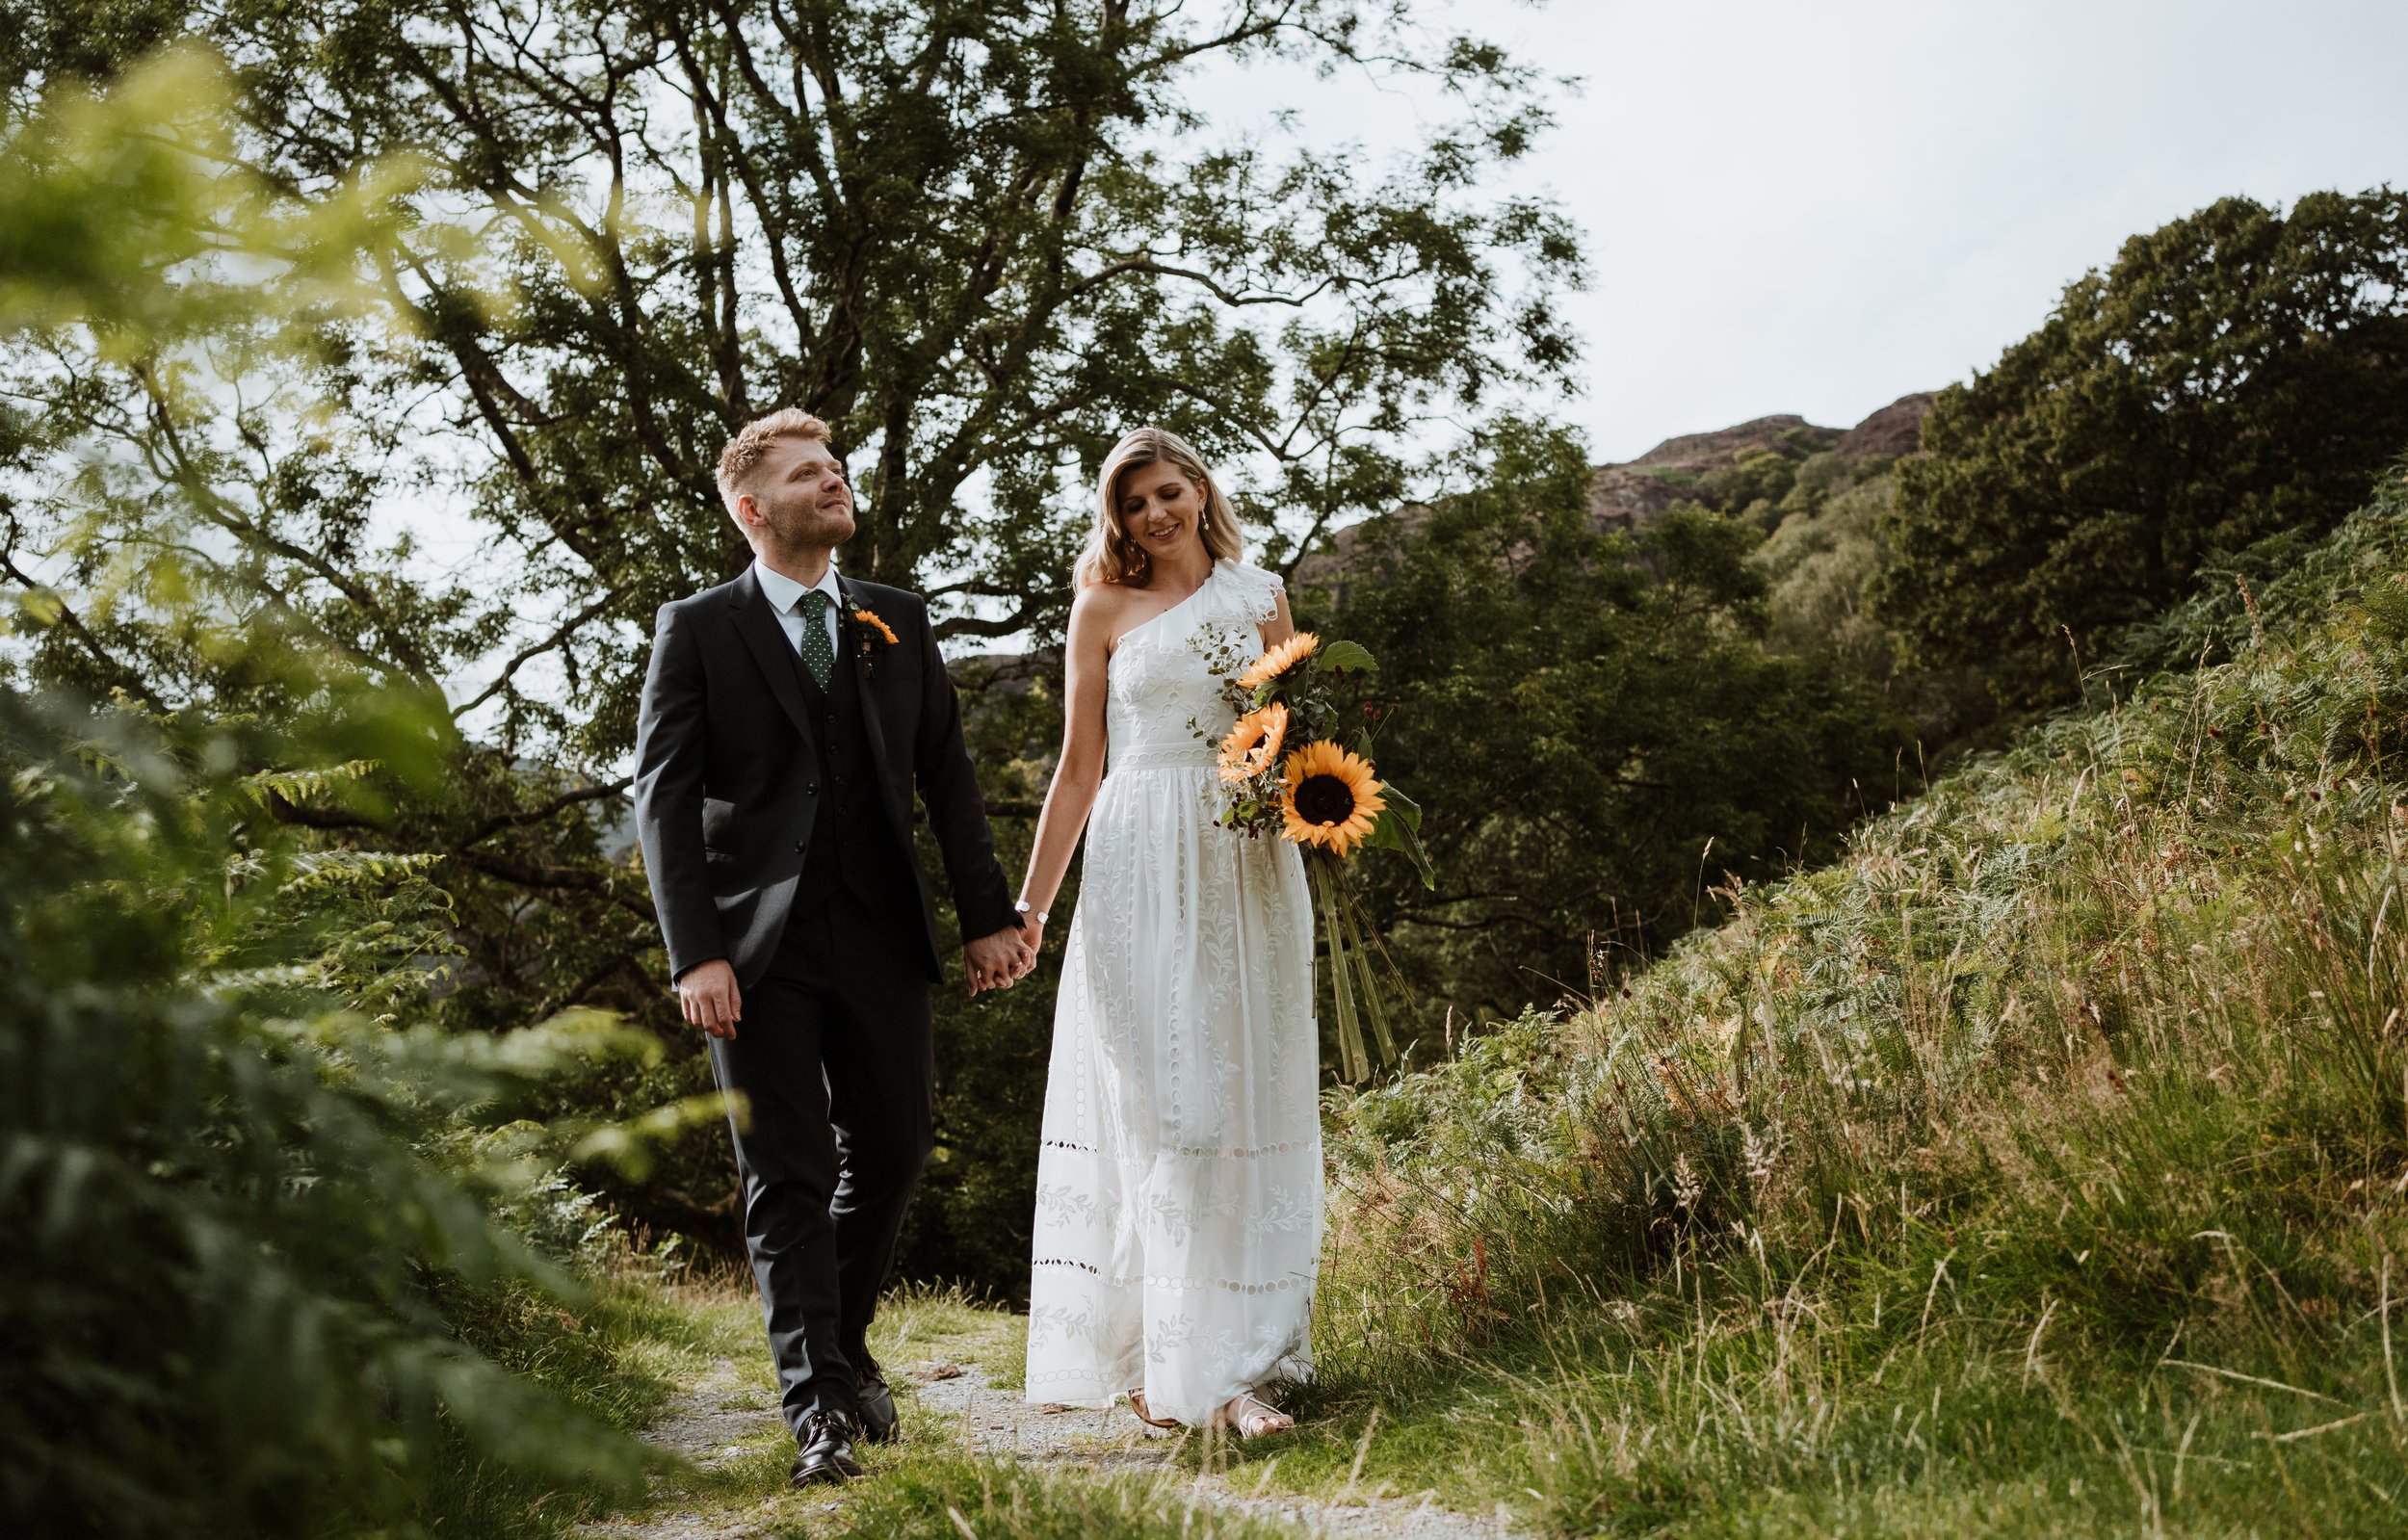 Bride and groom walking along a path hand in hand